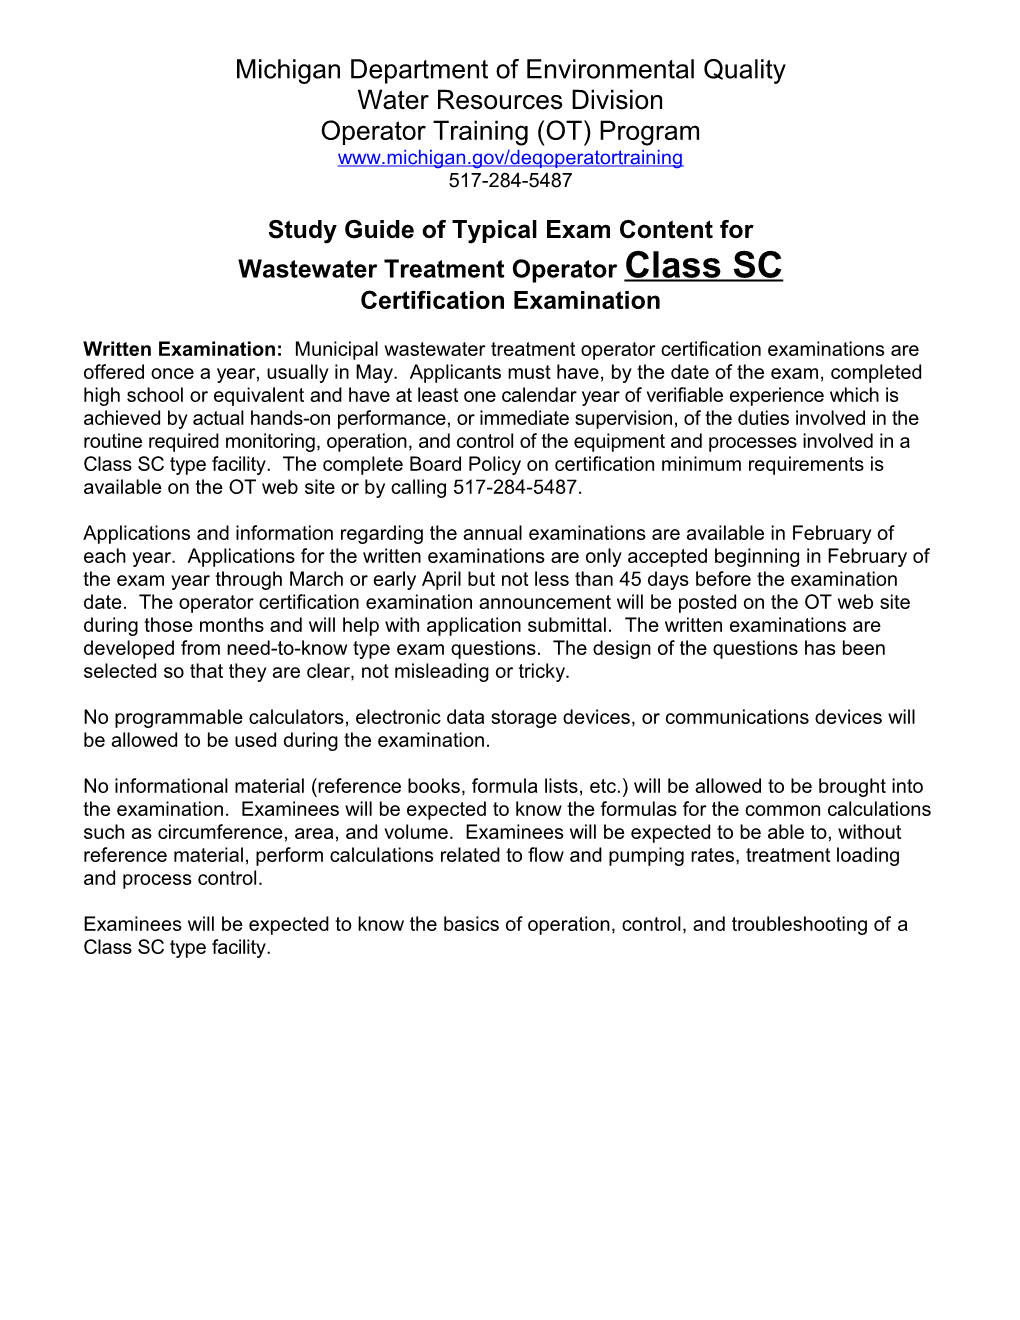 Study Guide of Typical Exam Content for Wastewater Treatment Operator Class SC Certification